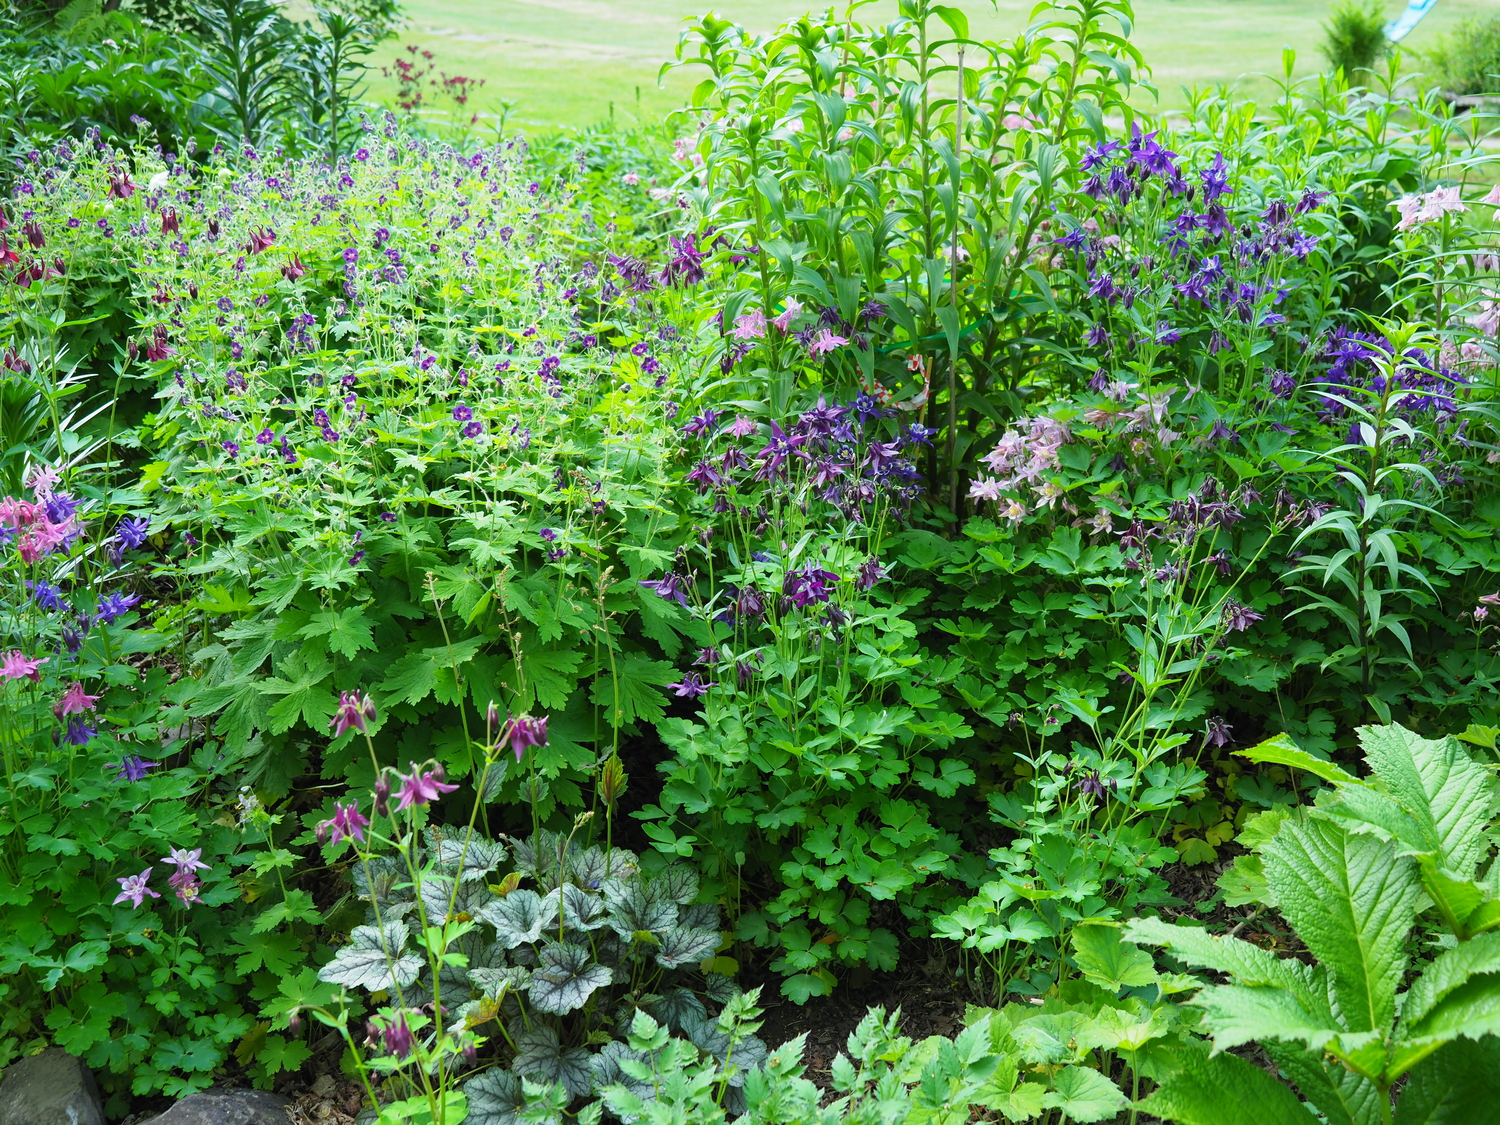 Smack in the middle of the long perennial island, a Heuchera (left foreground) marks the beginning of a line of Geranium phaeum 